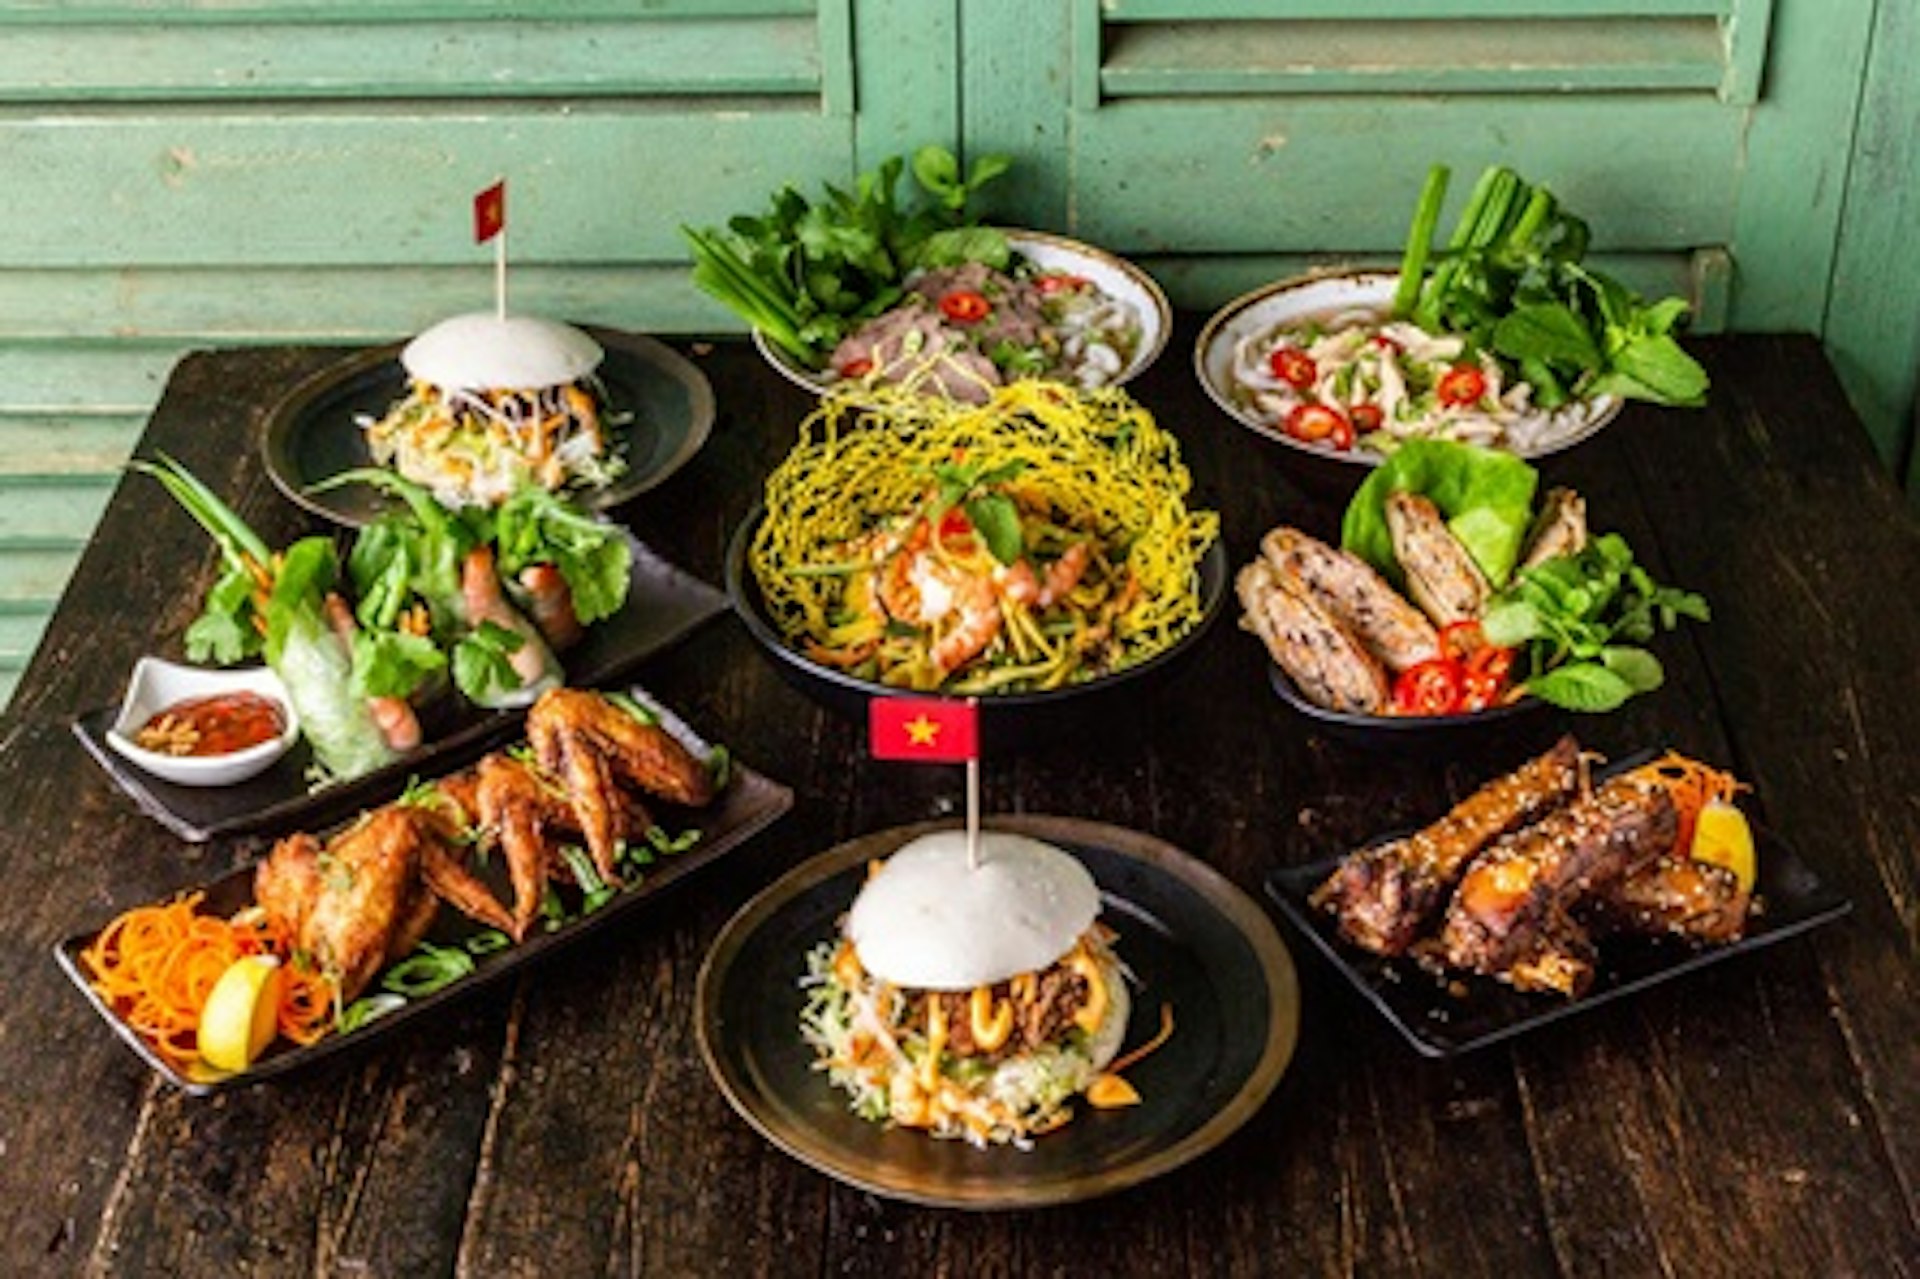 Four Course Vietnamese Street Food Dining Experience with Wine for Two at Pho & Bun